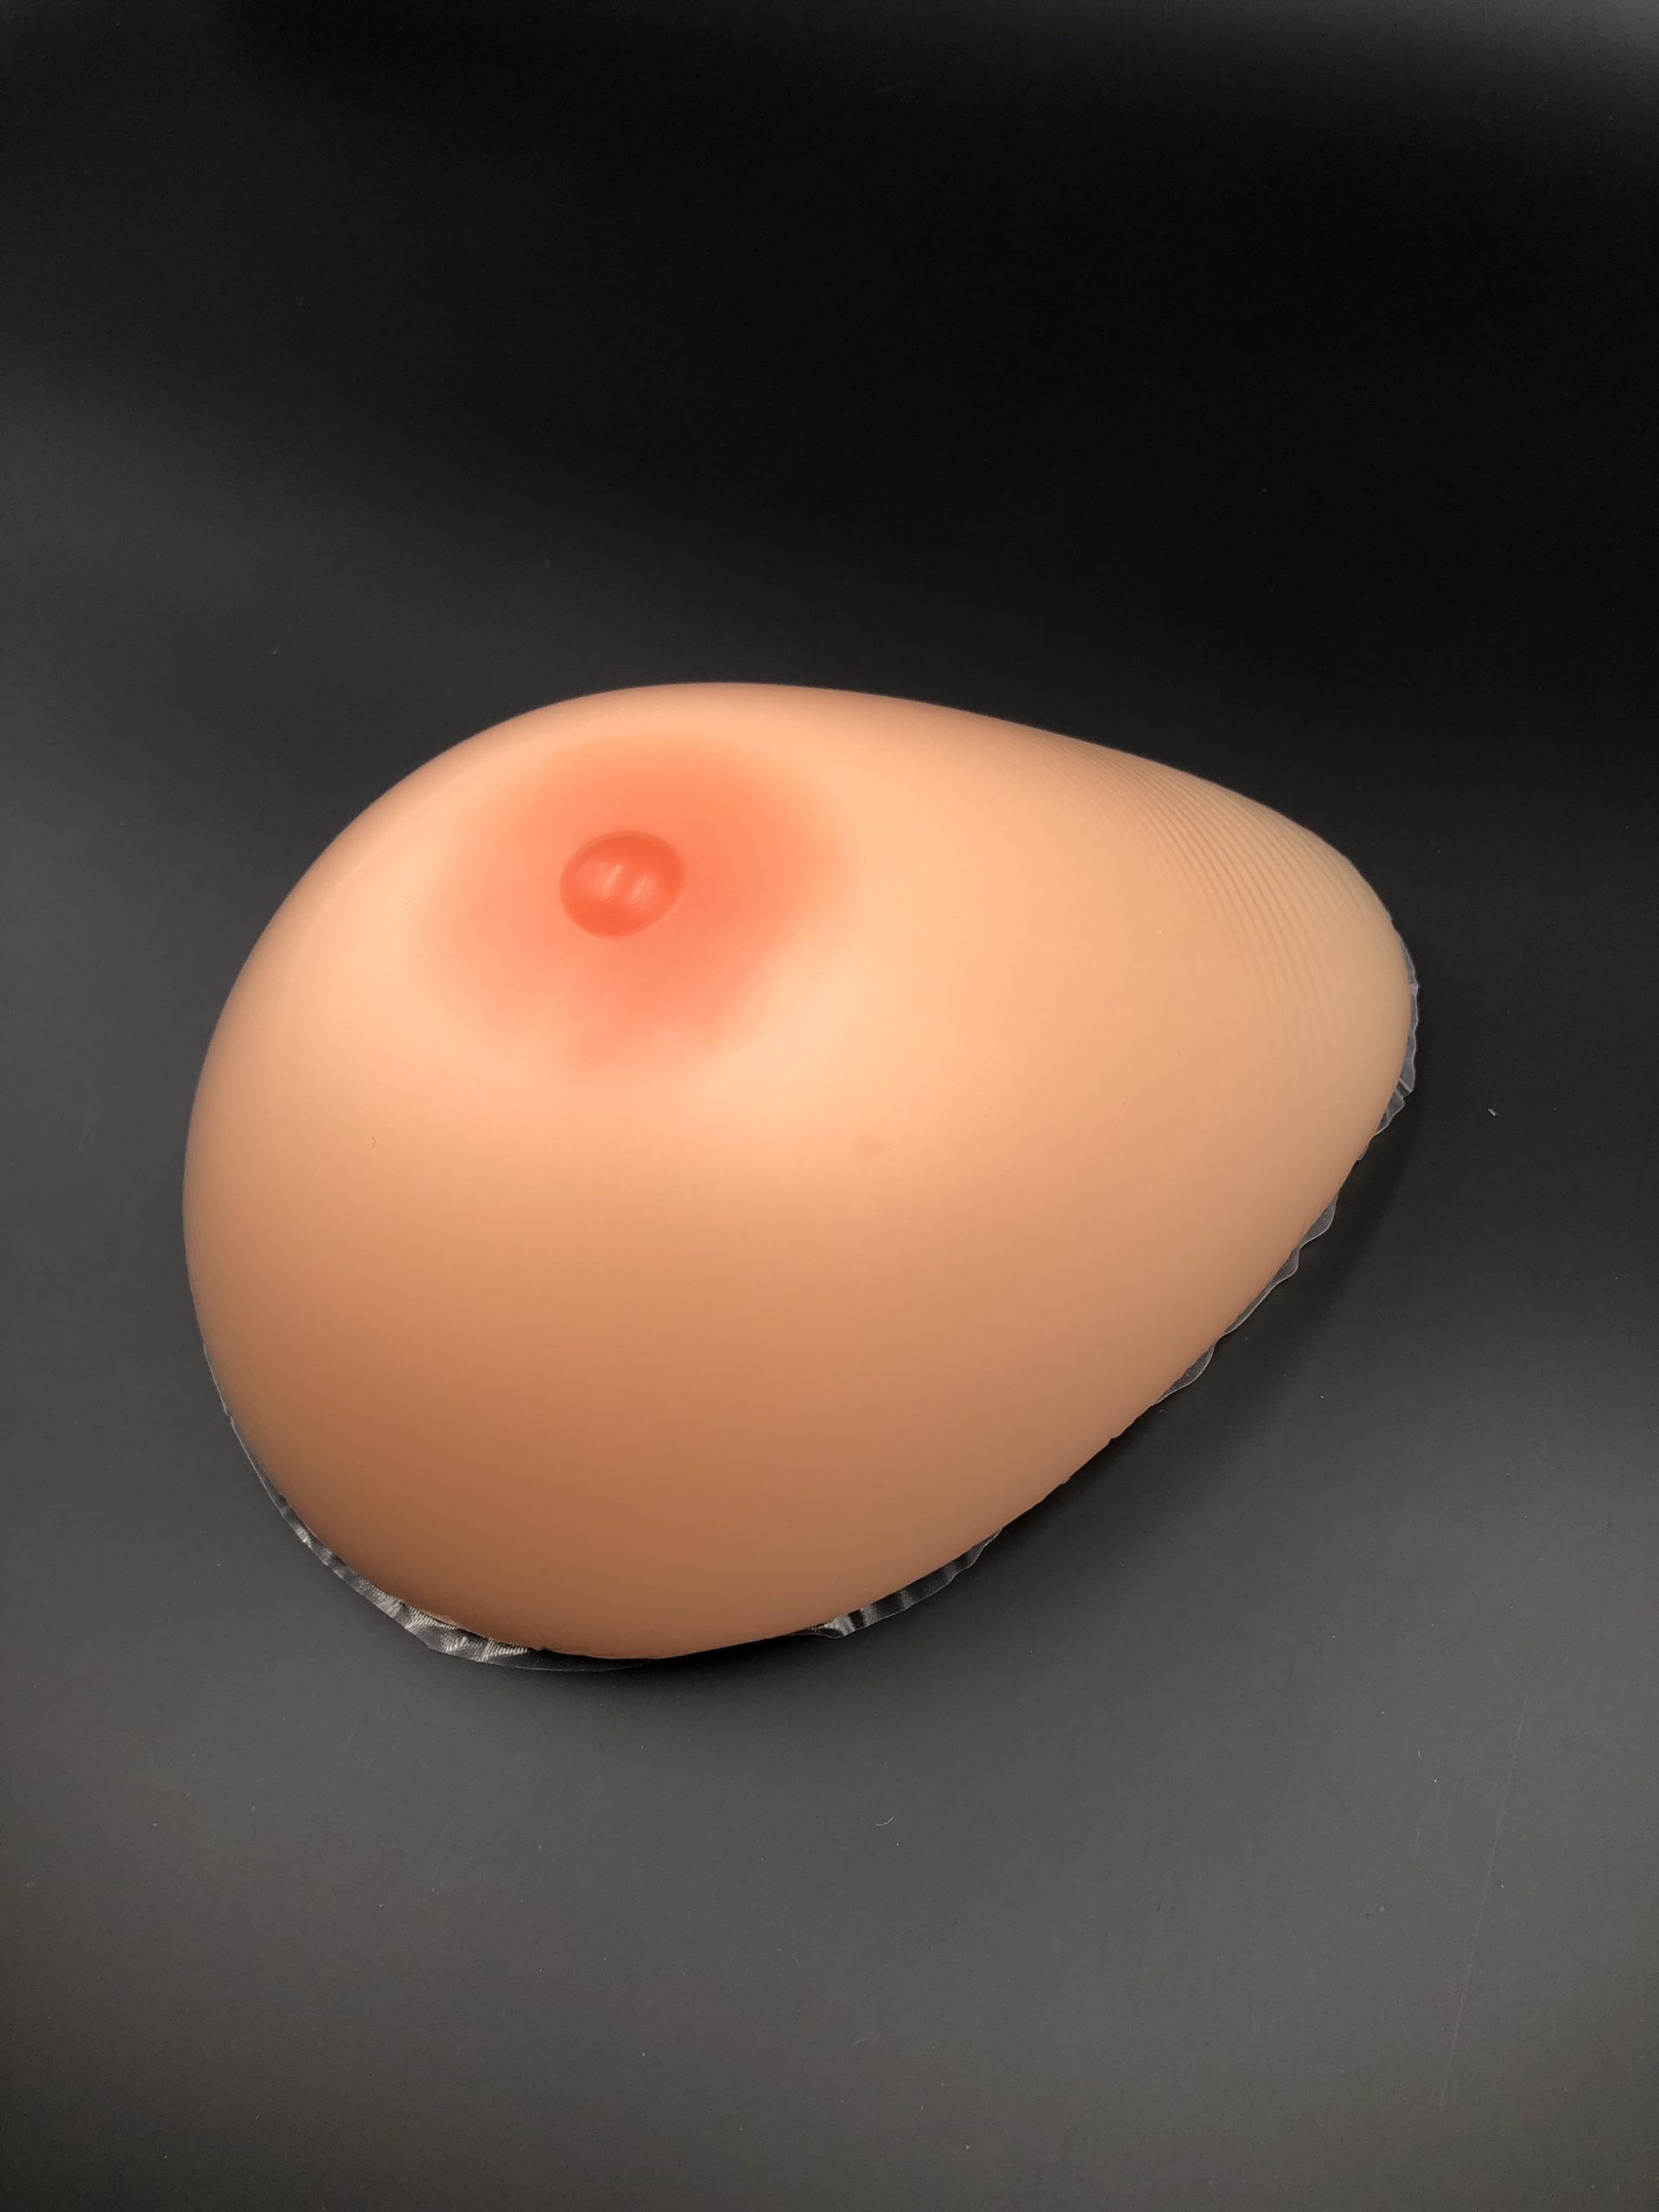 Where Can I Buy Breast Prosthesis